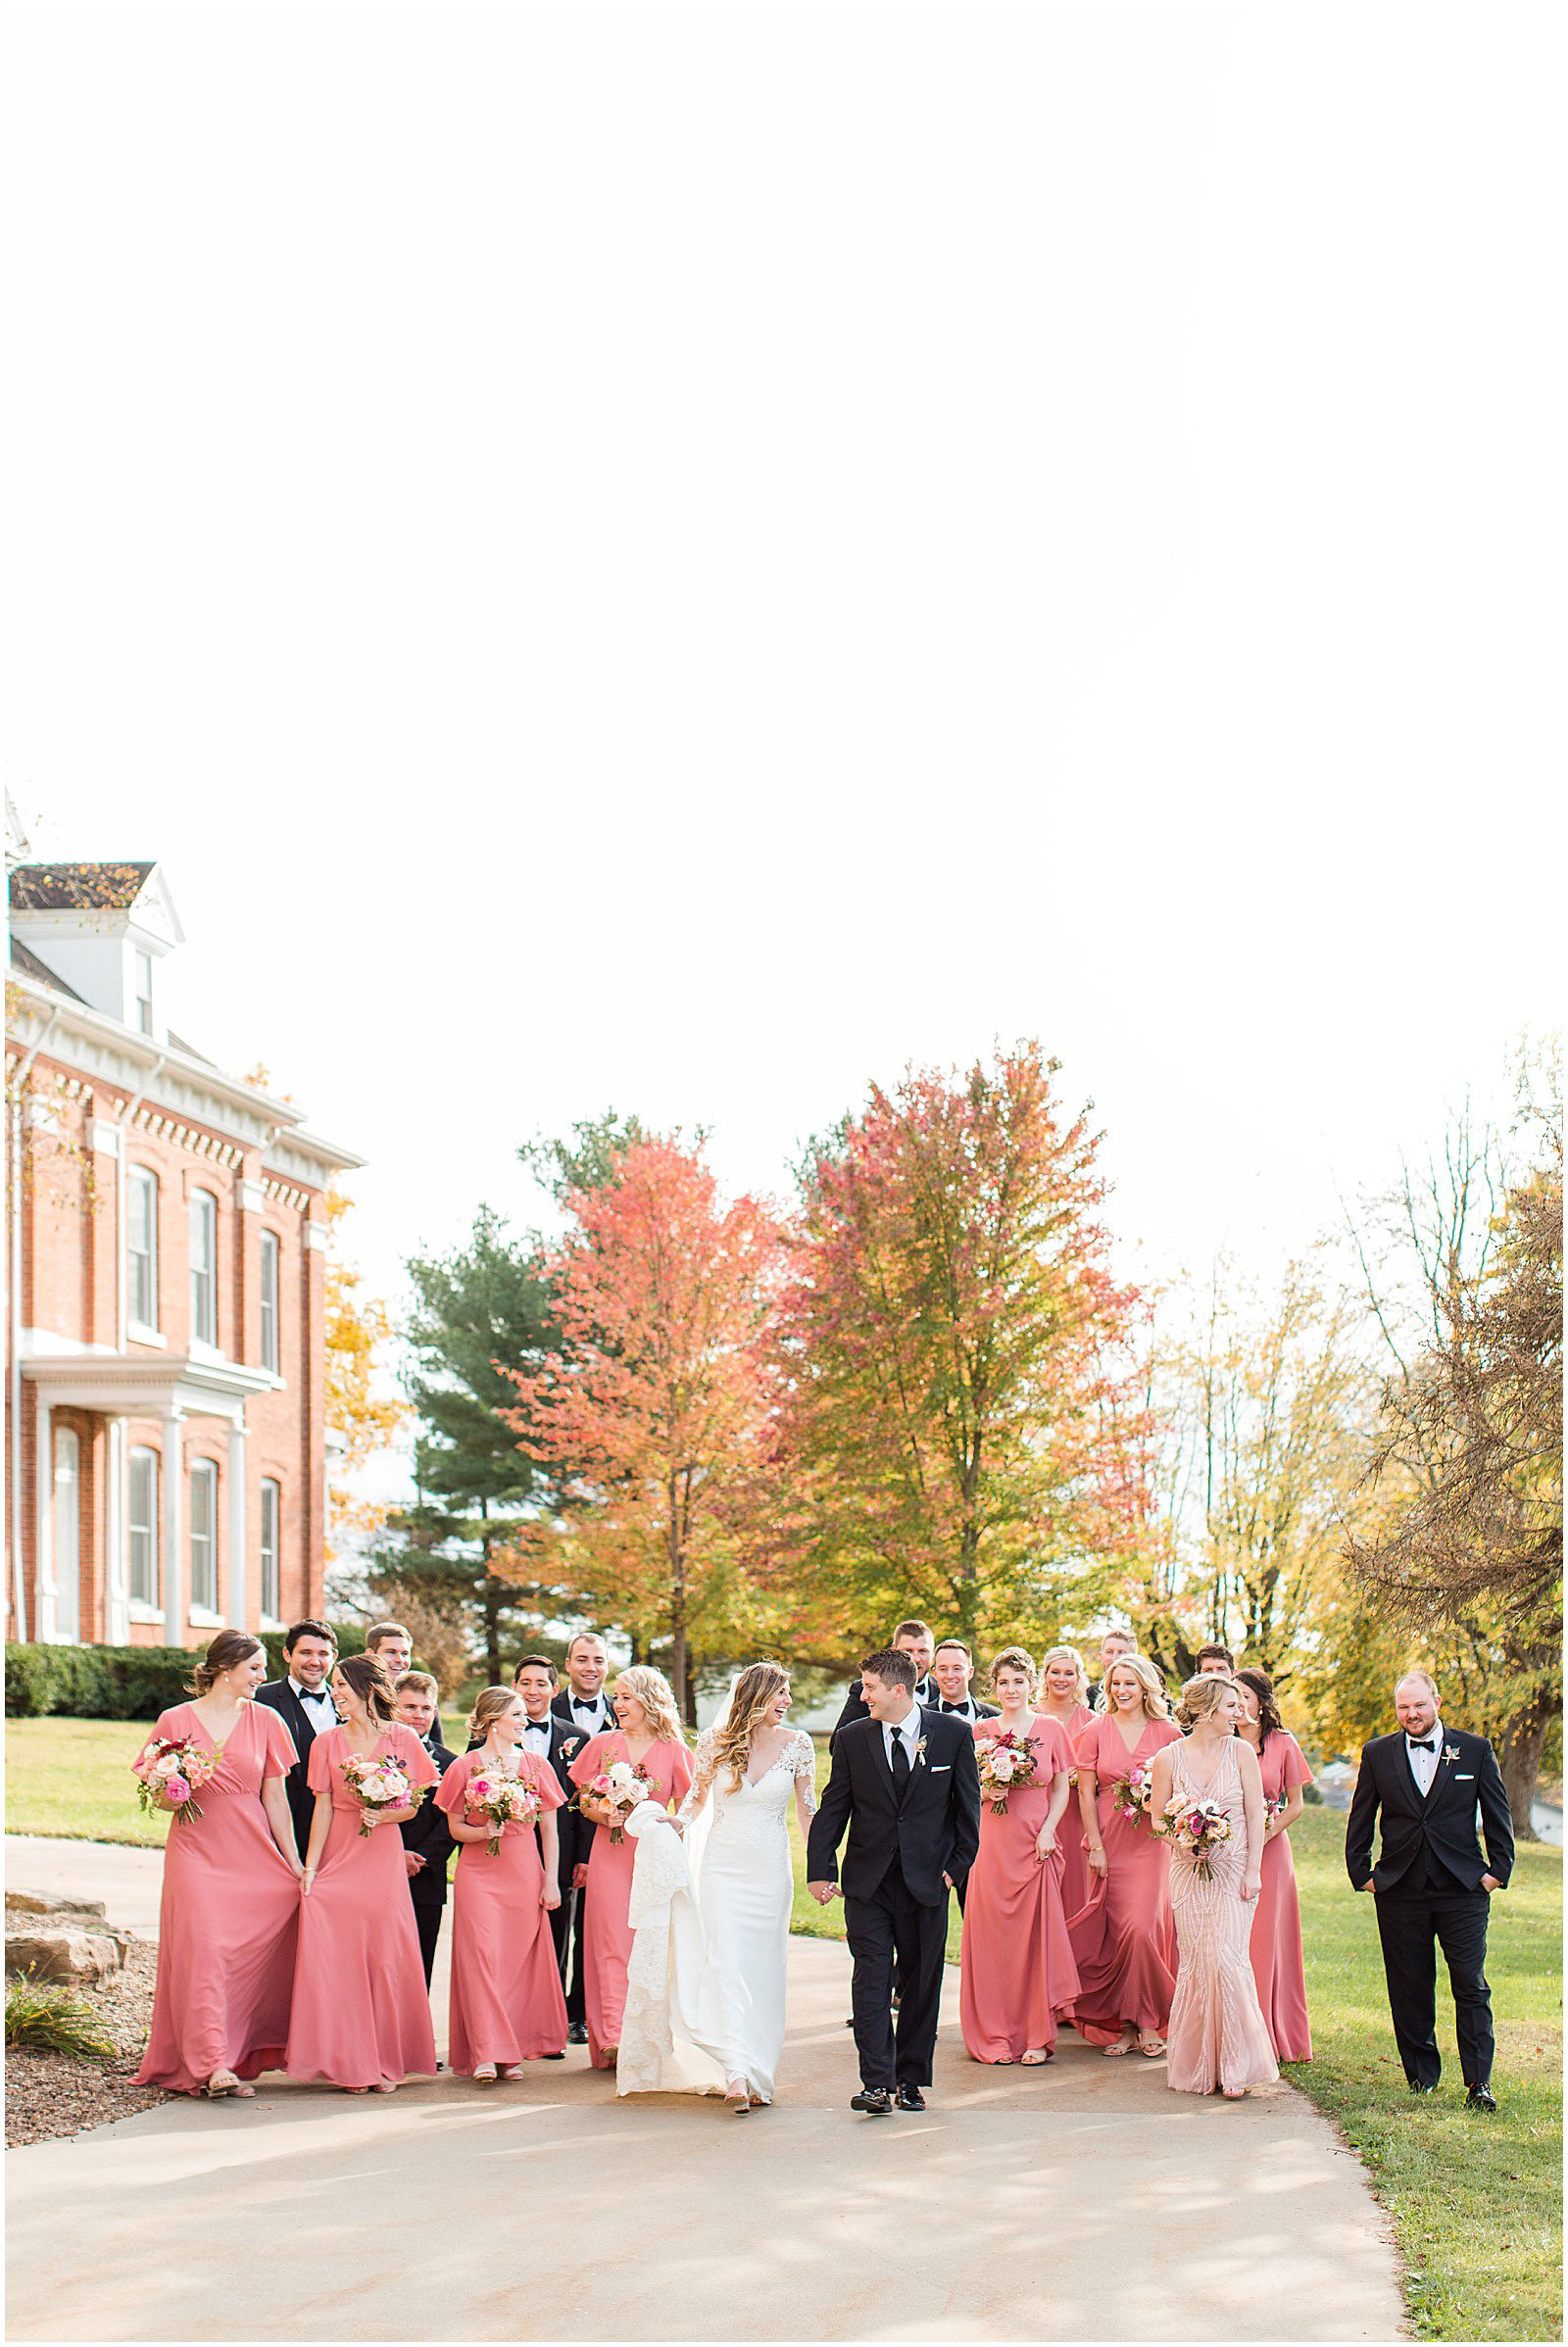 A Romantic Fall Wedding in Ferdinand, IN | Tori and Kyle | Bret and Brandie Photography 0100-2.jpg